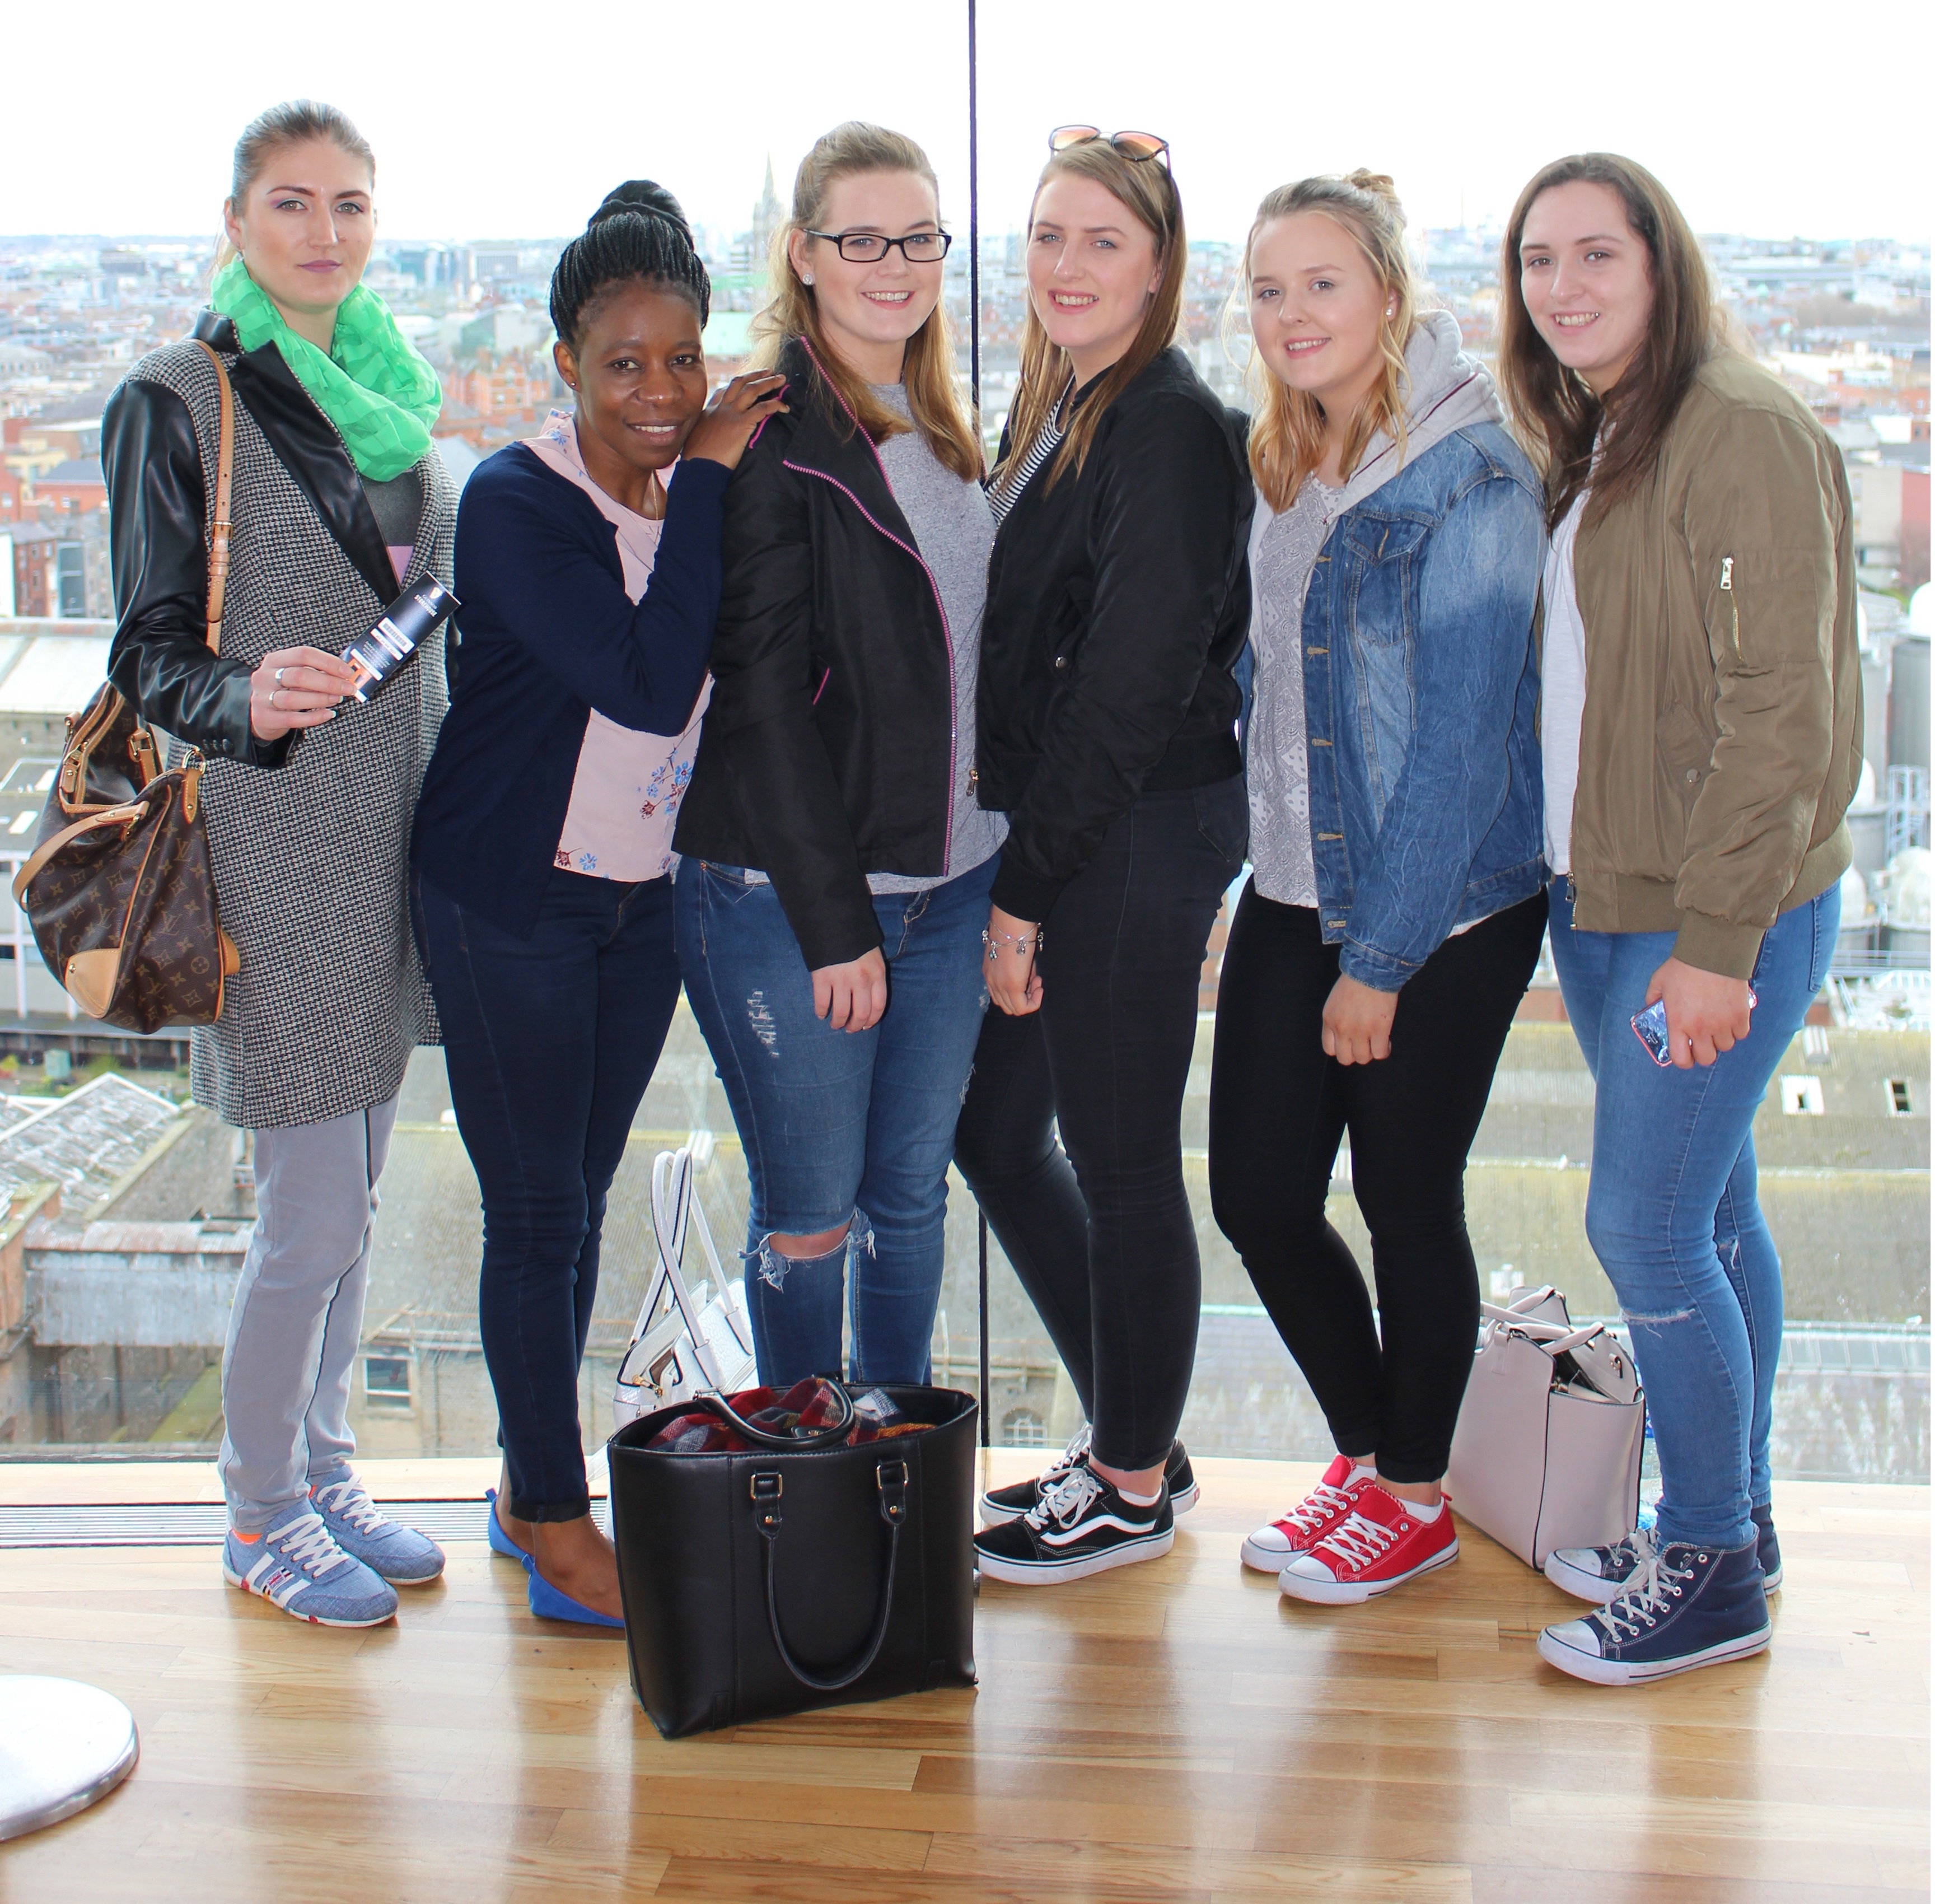 Travel & Tourism Students Monaghan Institute